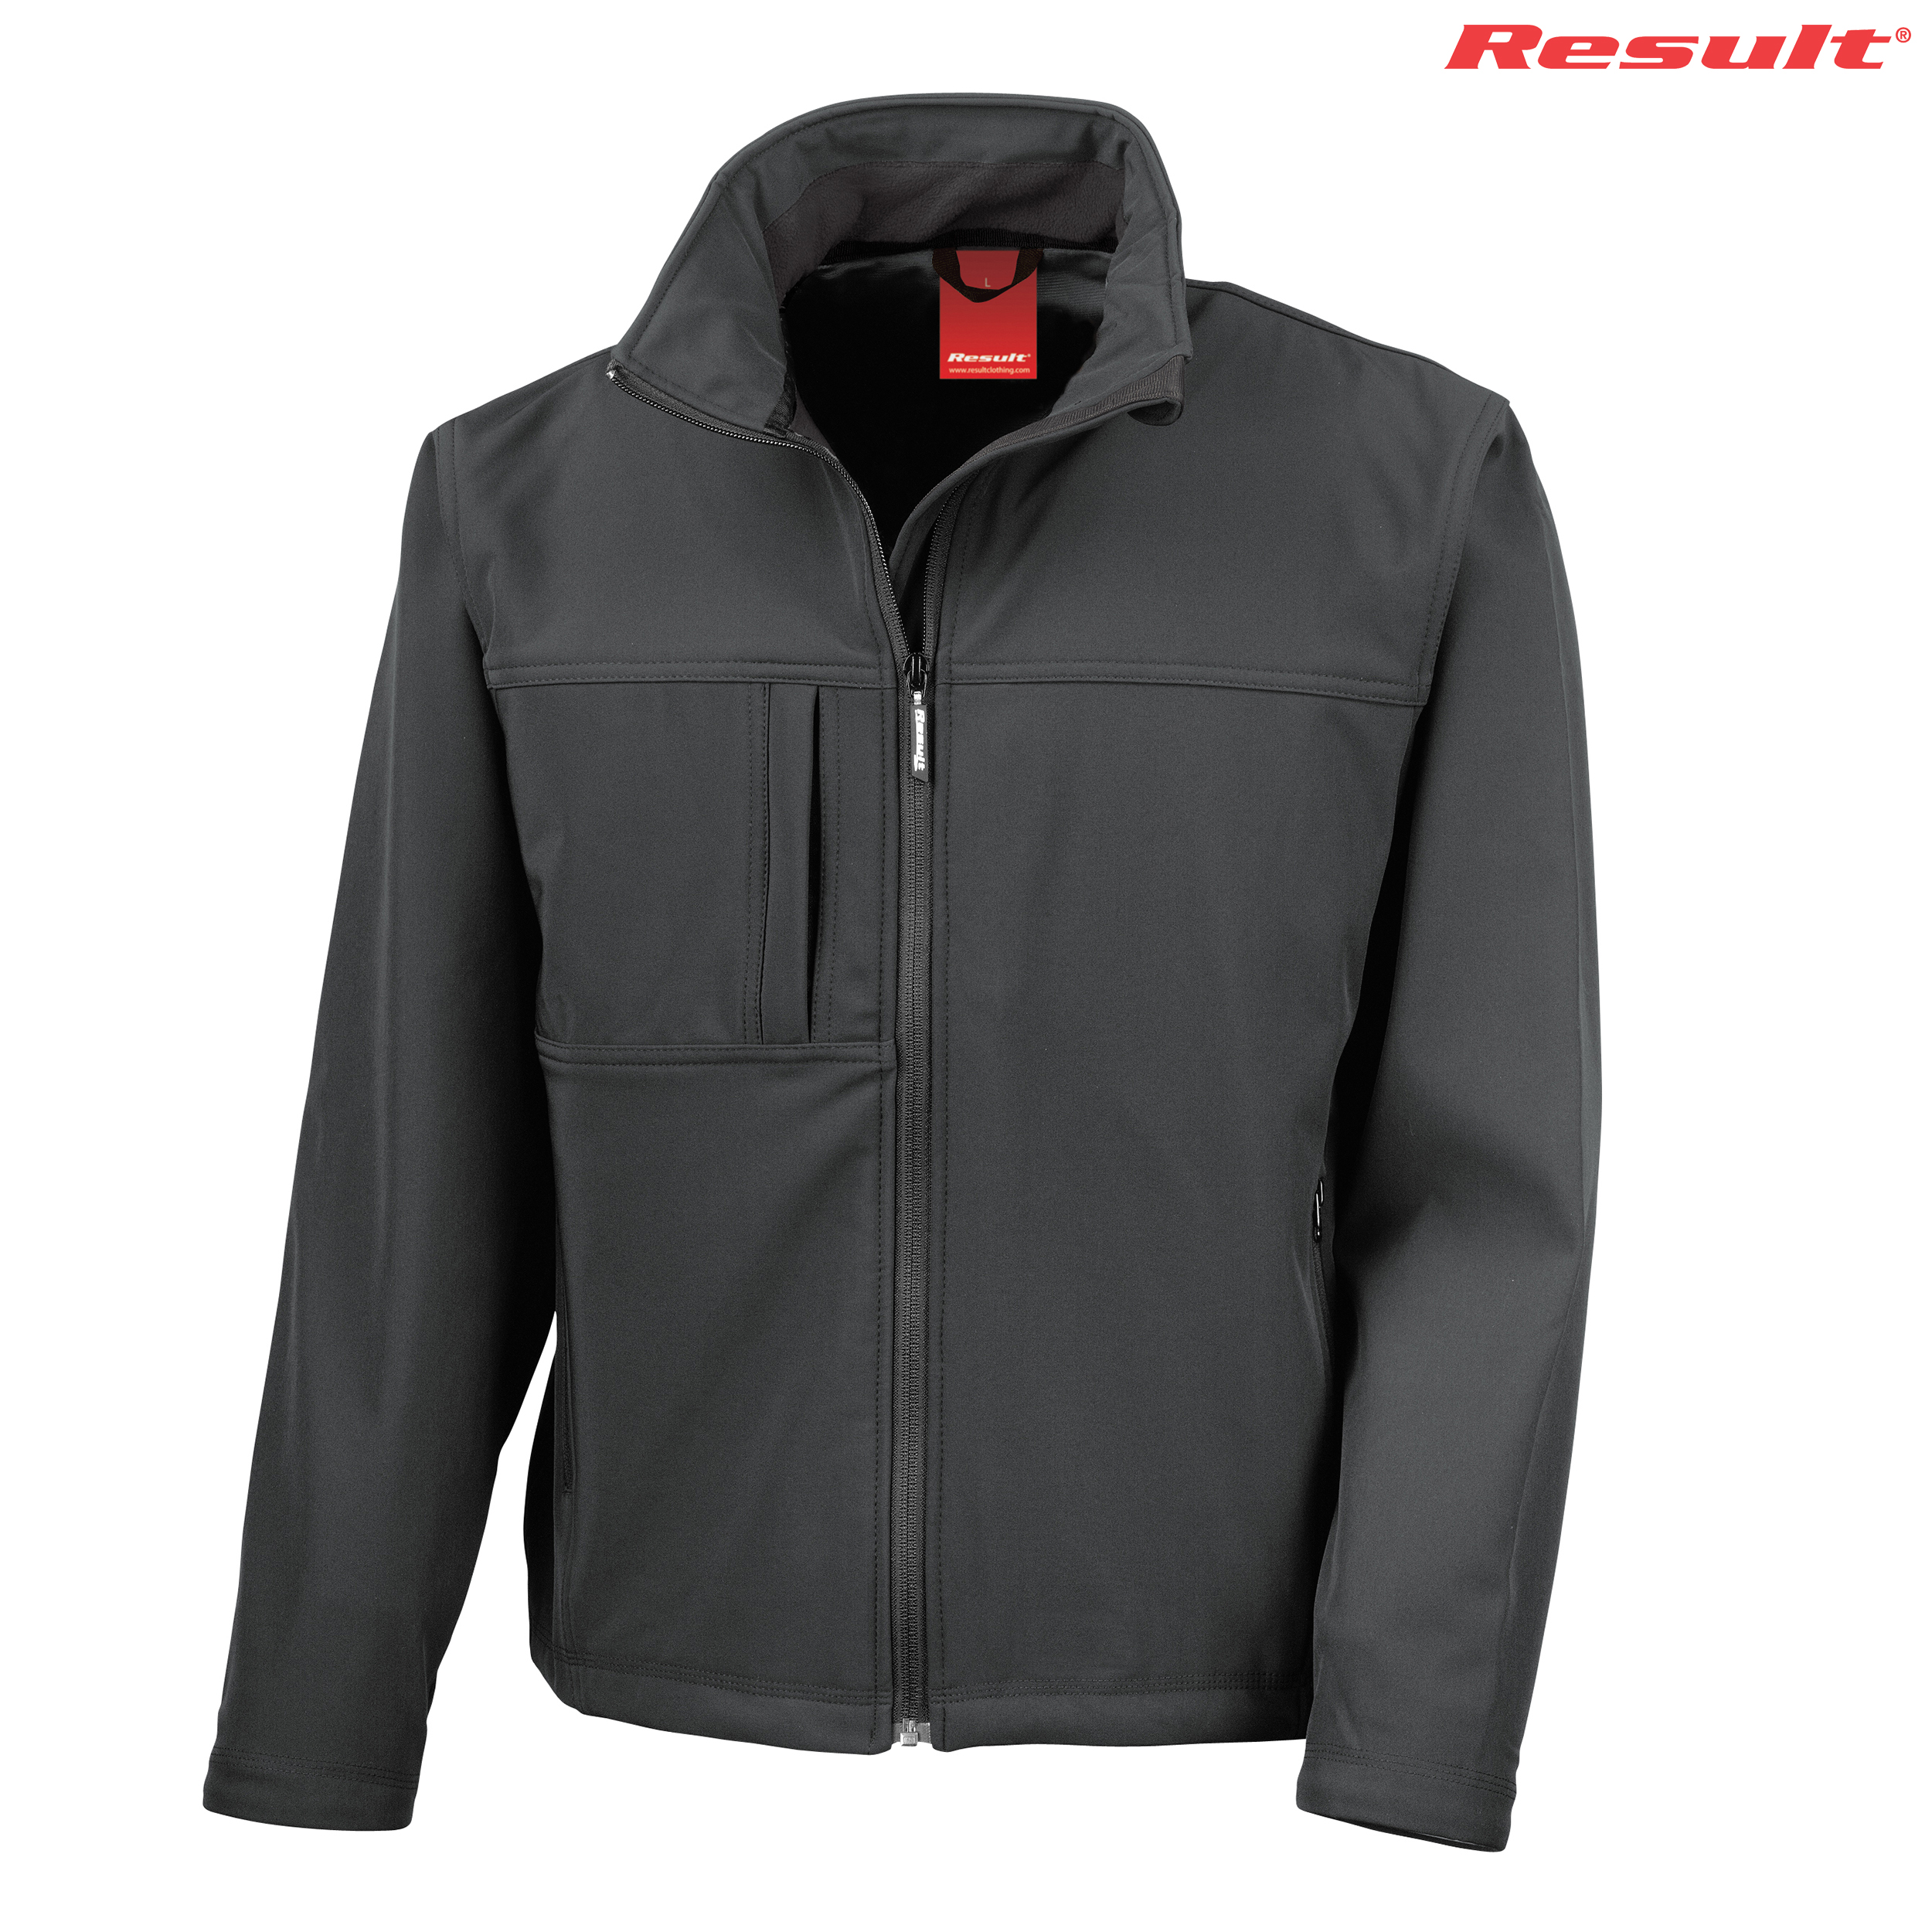 Premium Apparel R121M Result Adults Classic Soft Shell Jacket